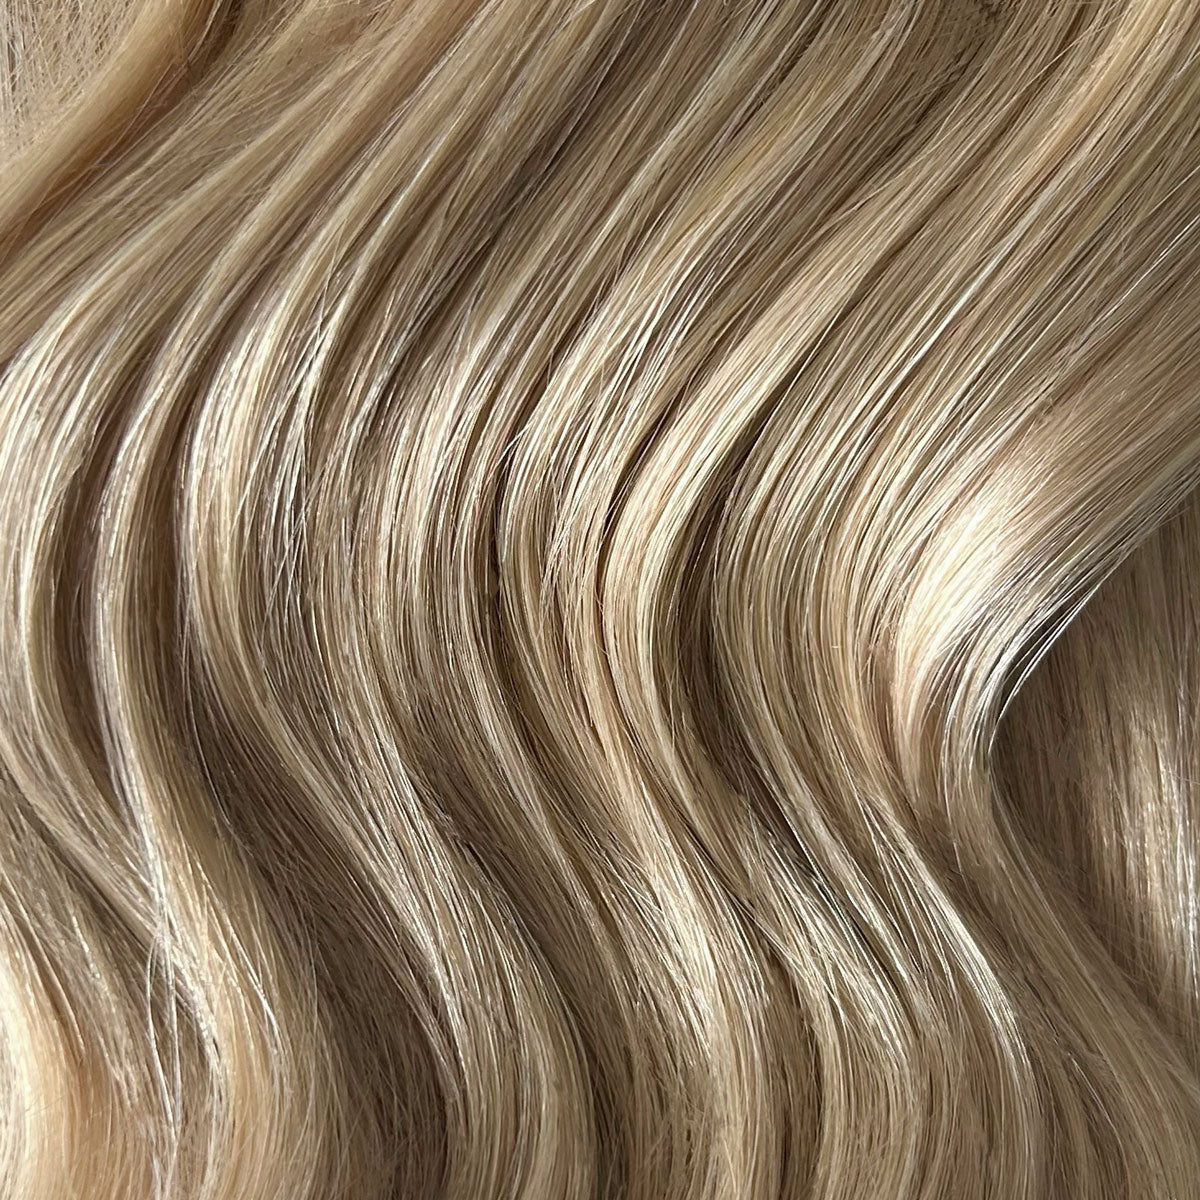 Halo Hair Extensions #51 Champagne Blonde